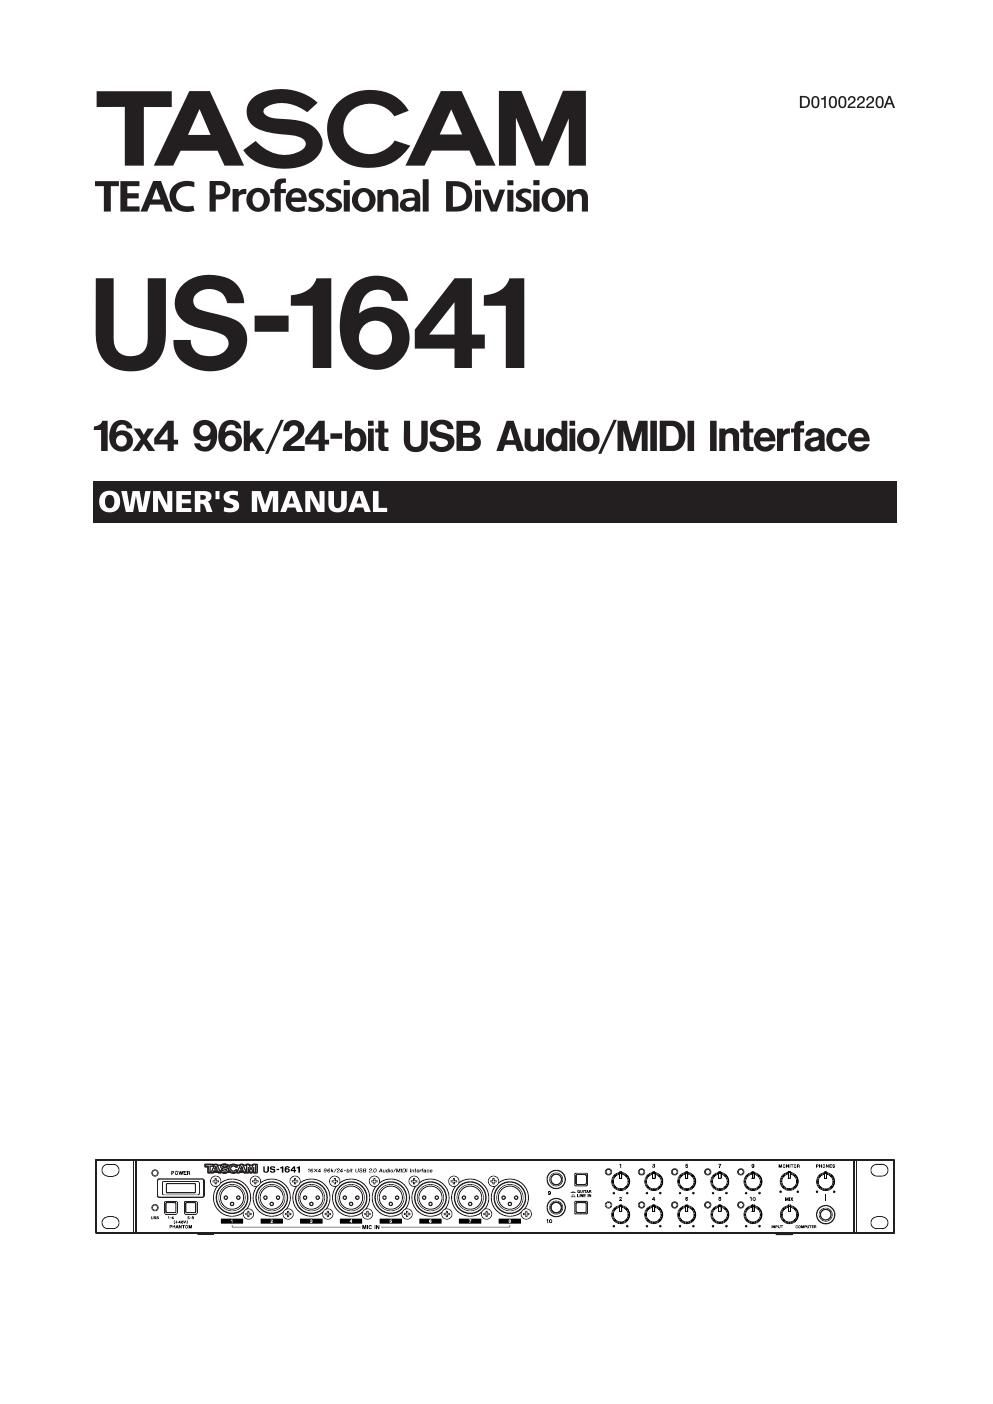 Tascam US 1641 Owners Manual